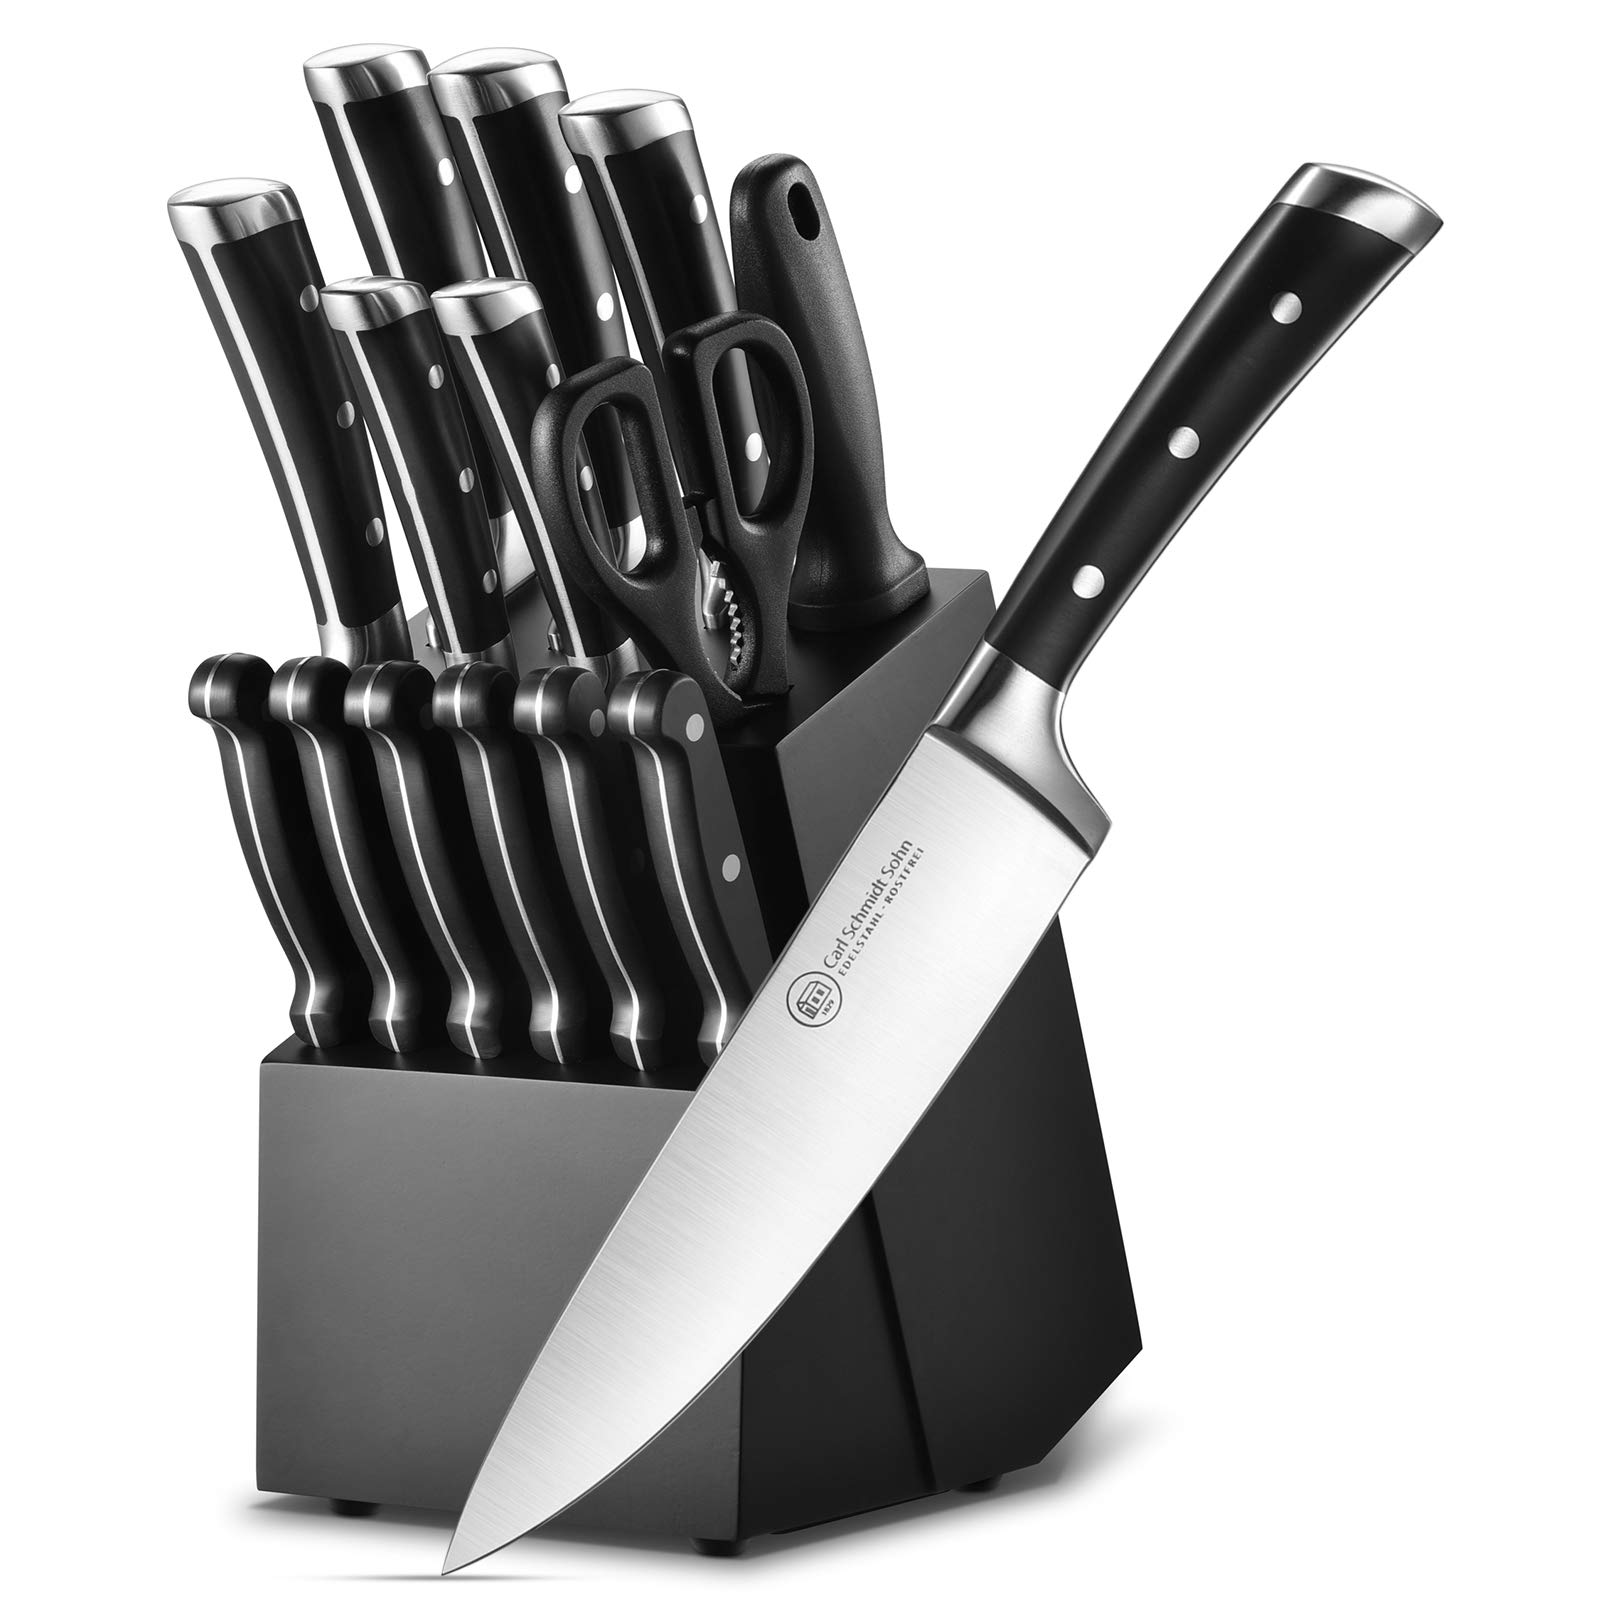 1829 Carl Schmidt So Kitchen Knife Set - 1829 cARL ScHMIDT SOHN 15 Pieces Knife Block Set with Sharpener, Forged Stainless Steel, Professional chef B